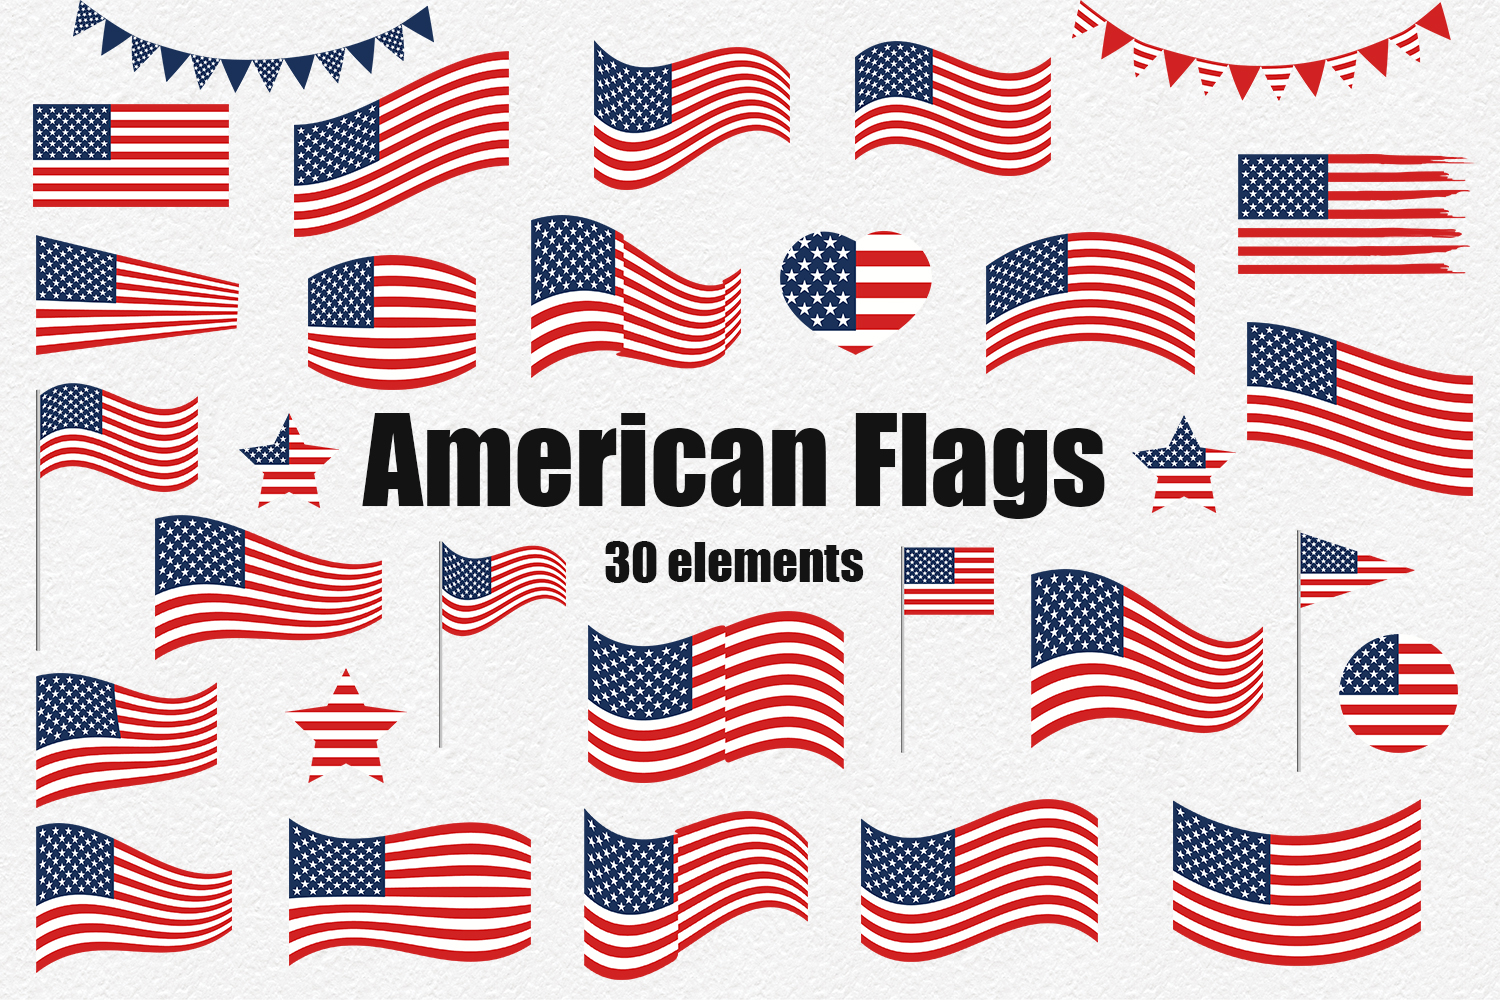 Types Of American Flags And Their Meanings